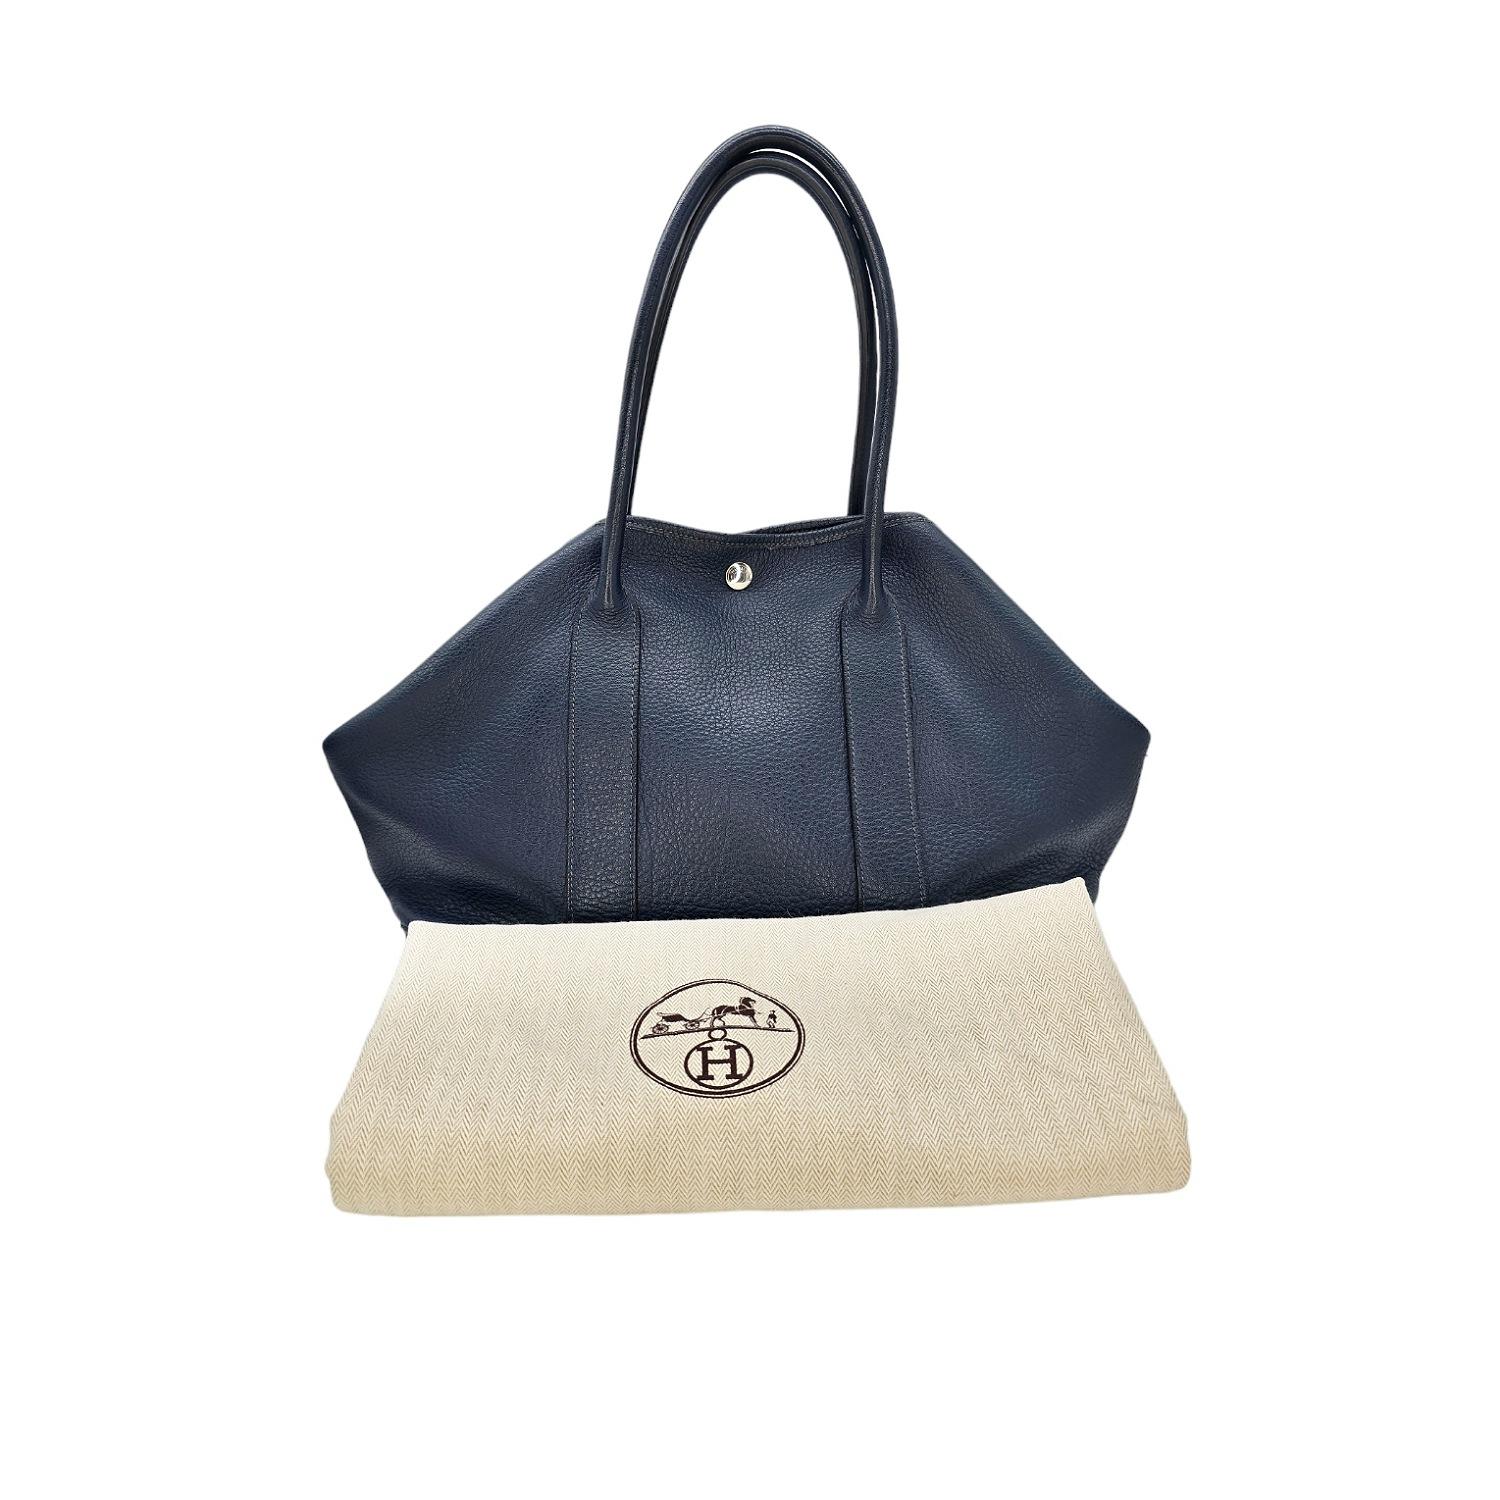 The Garden Party MM tote is a great everyday bag to add to your collection. The design is simple and clean yet instantly recognizable as a Hermes. The durable and supple pebbled leather body is framed by gorgeous Bleu Indigo colored leather handles